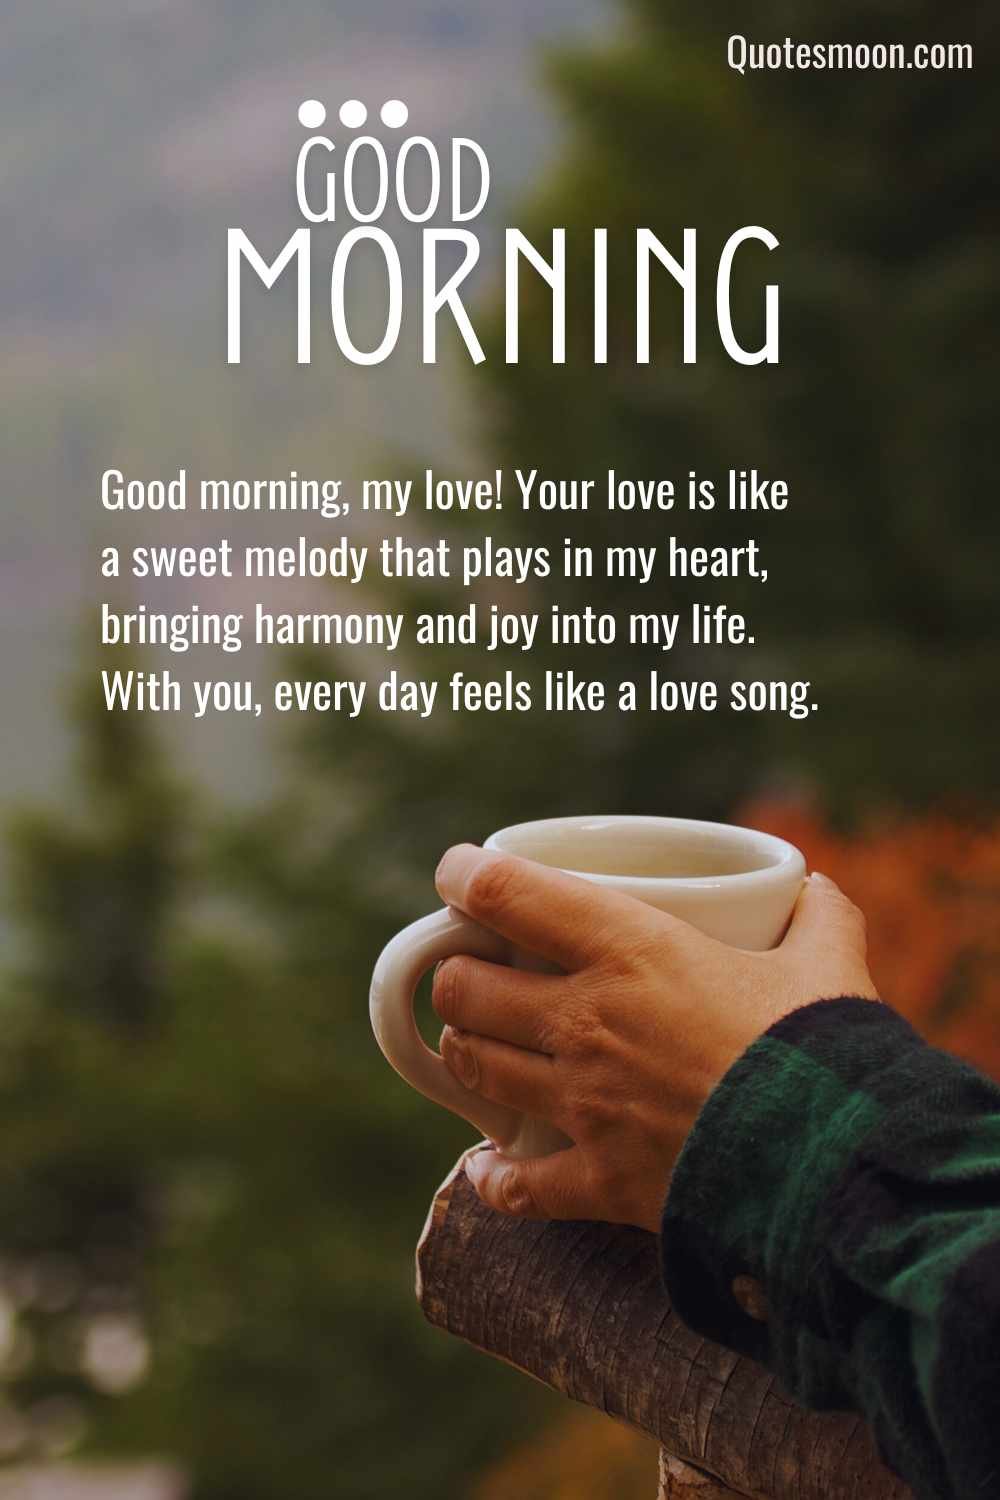 Thoughtful good morning message for special one with images